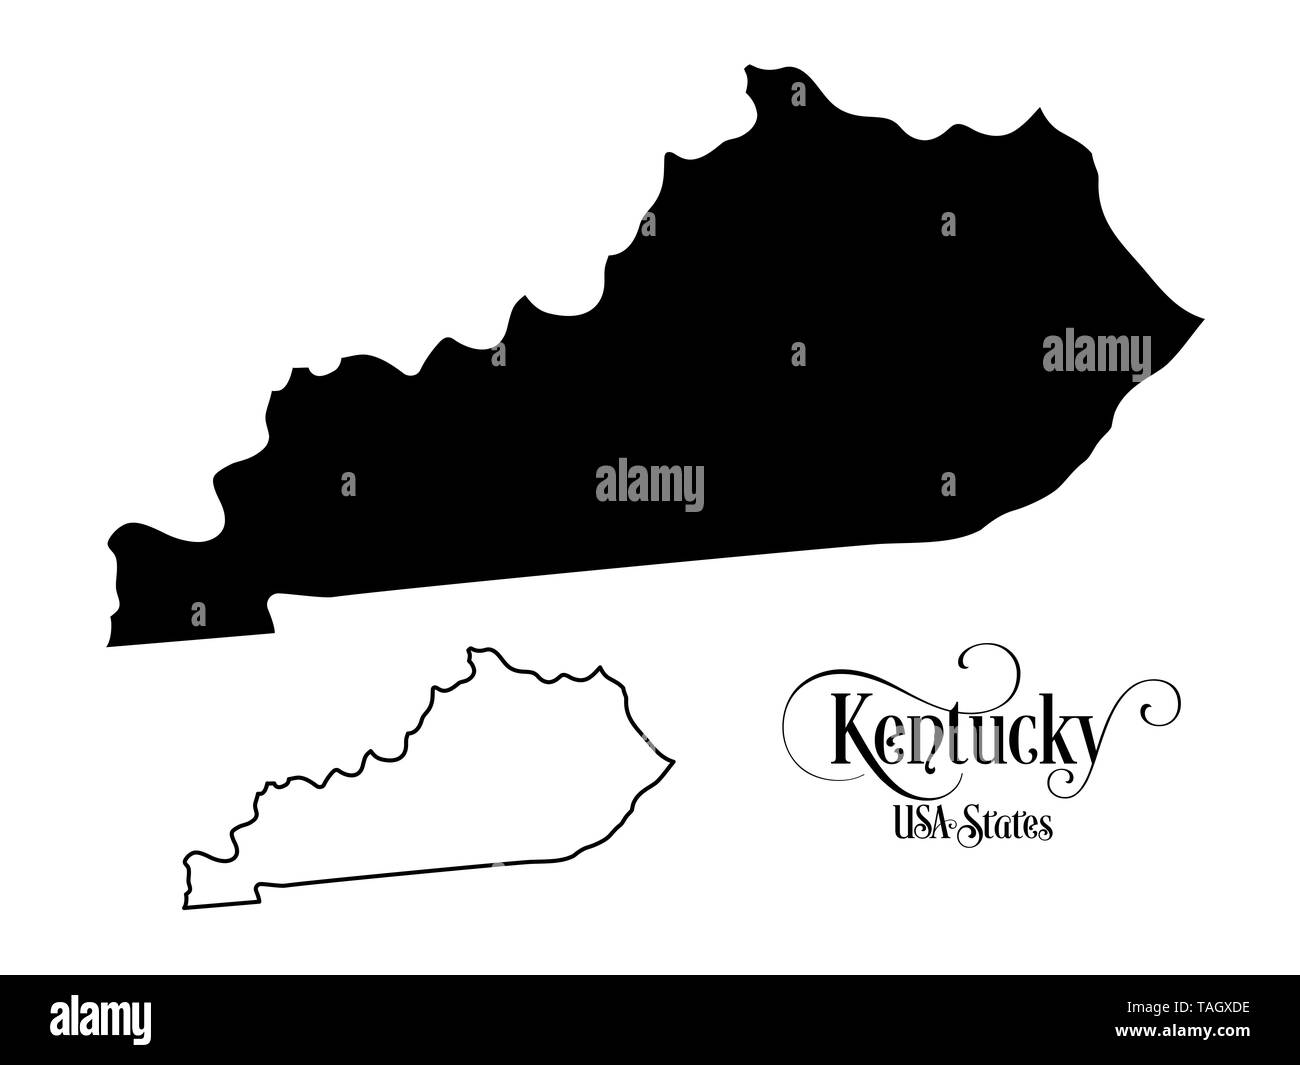 Map of The United States of America (USA) State of Kentucky - Illustration on White Background. Stock Photo